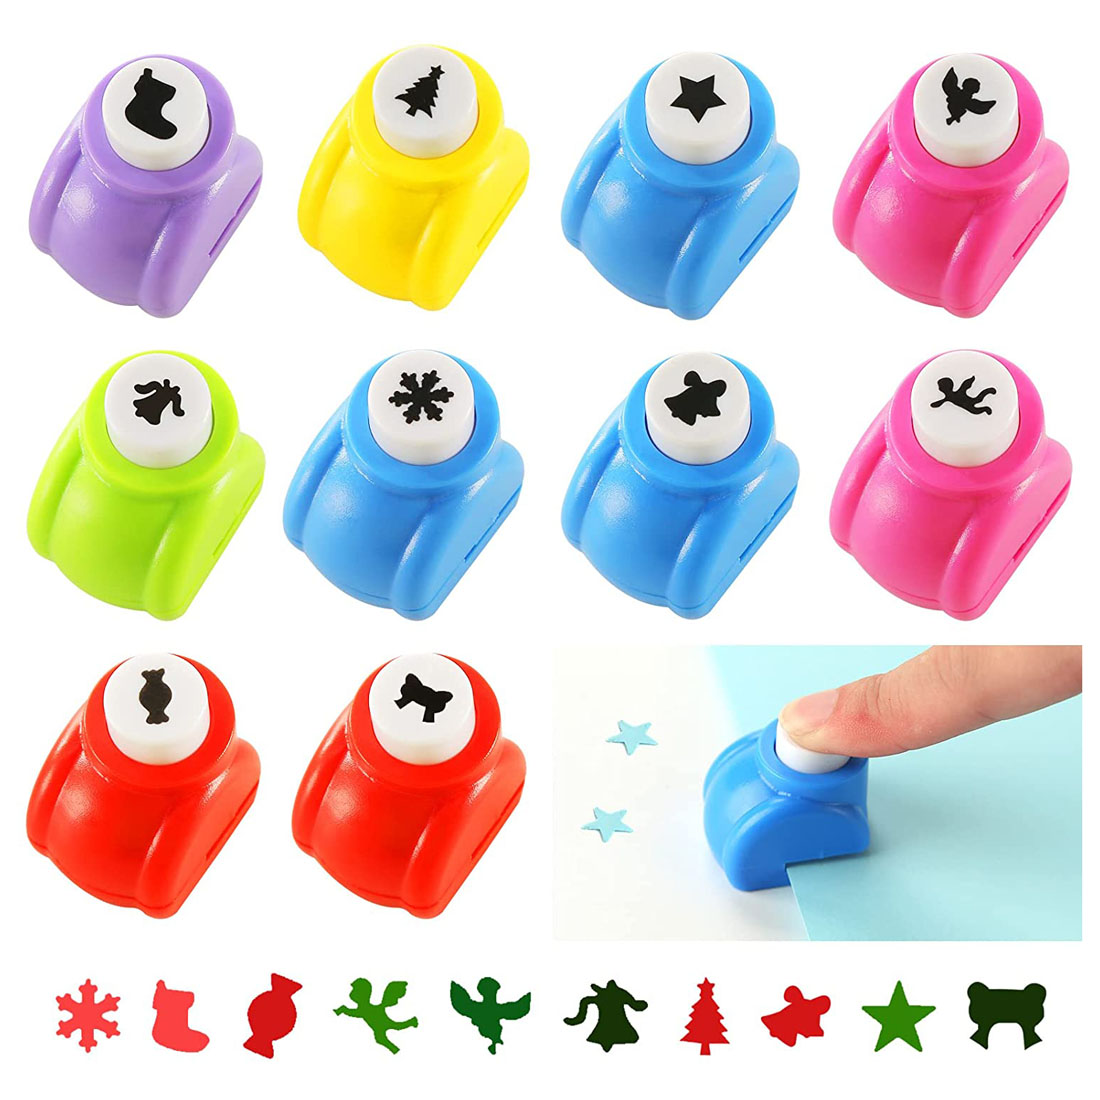 2023 - 12 Piece Craft Hole Punch Shape Set, Small Paper Hole Punch